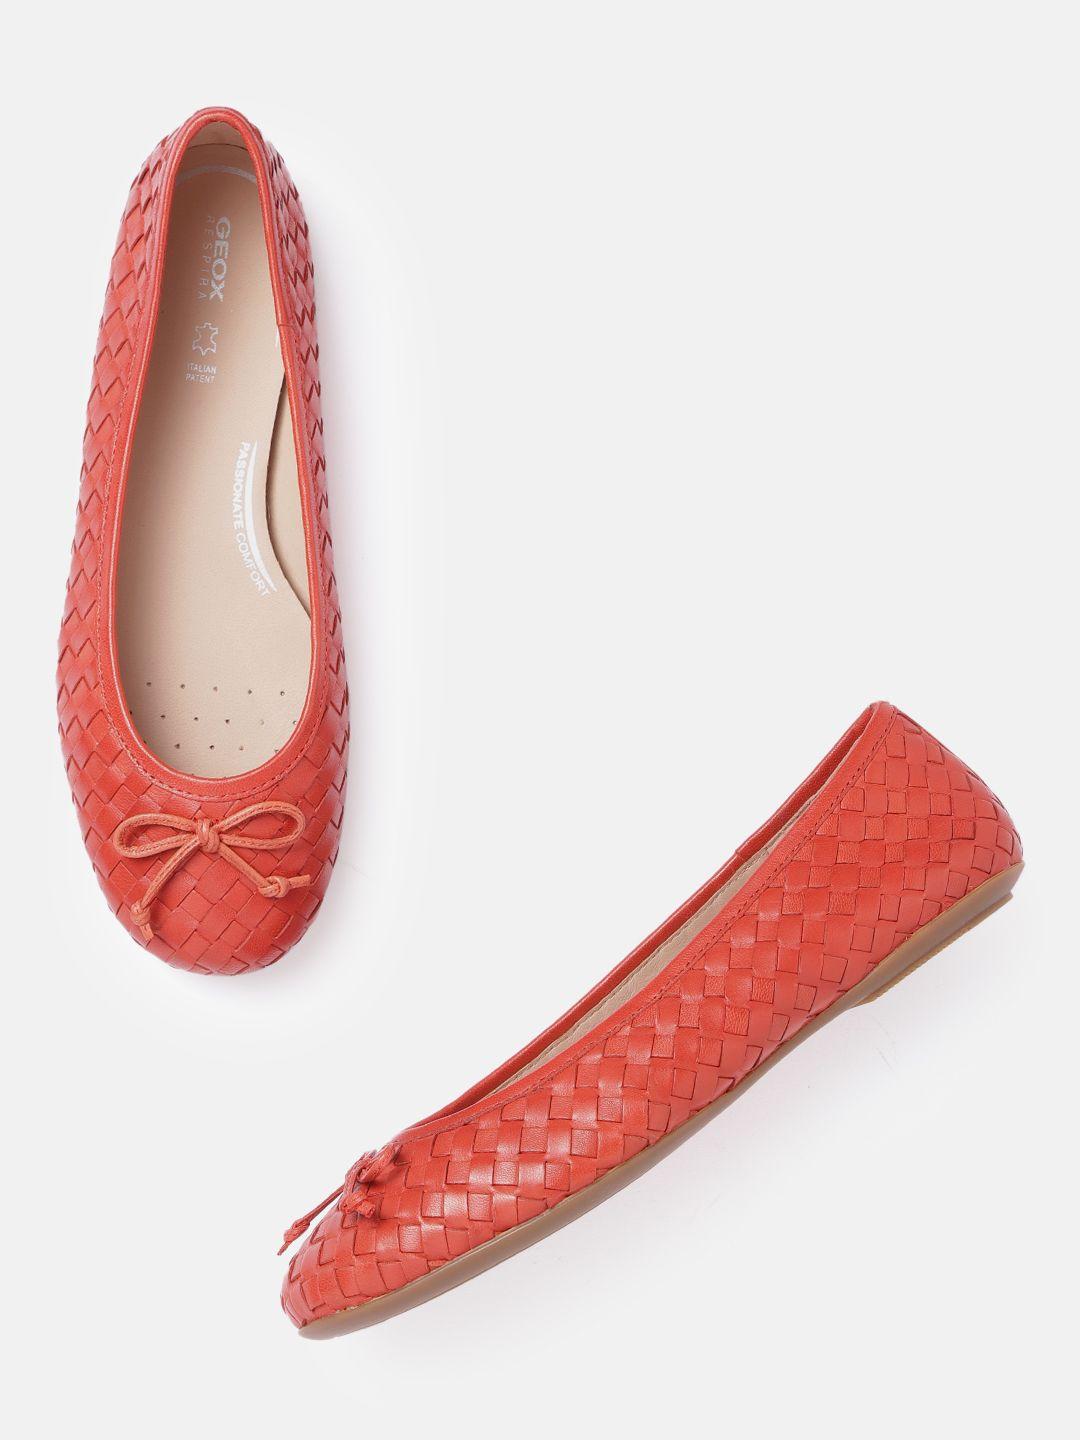 geox women coral textured ballerinas with bows flats